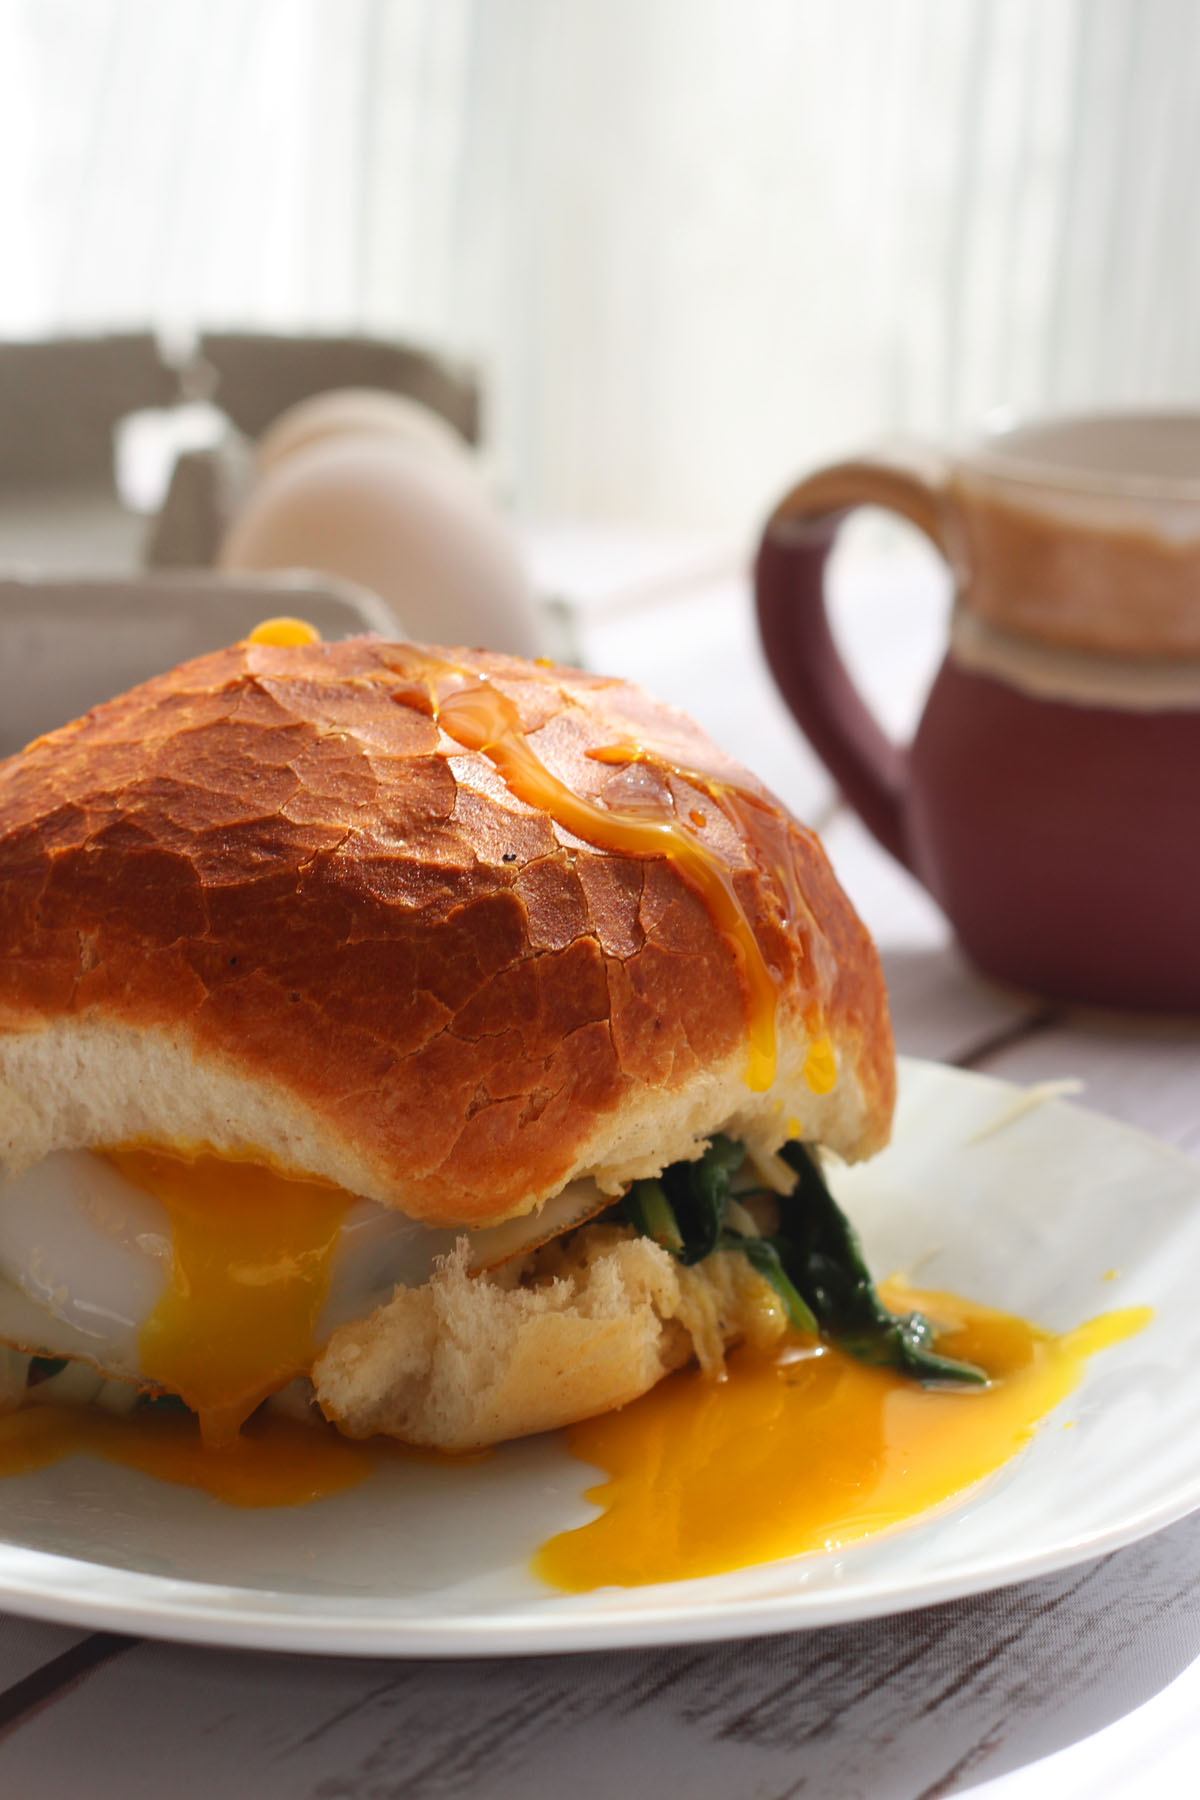 Duck egg sandwich with gruyere and spinach